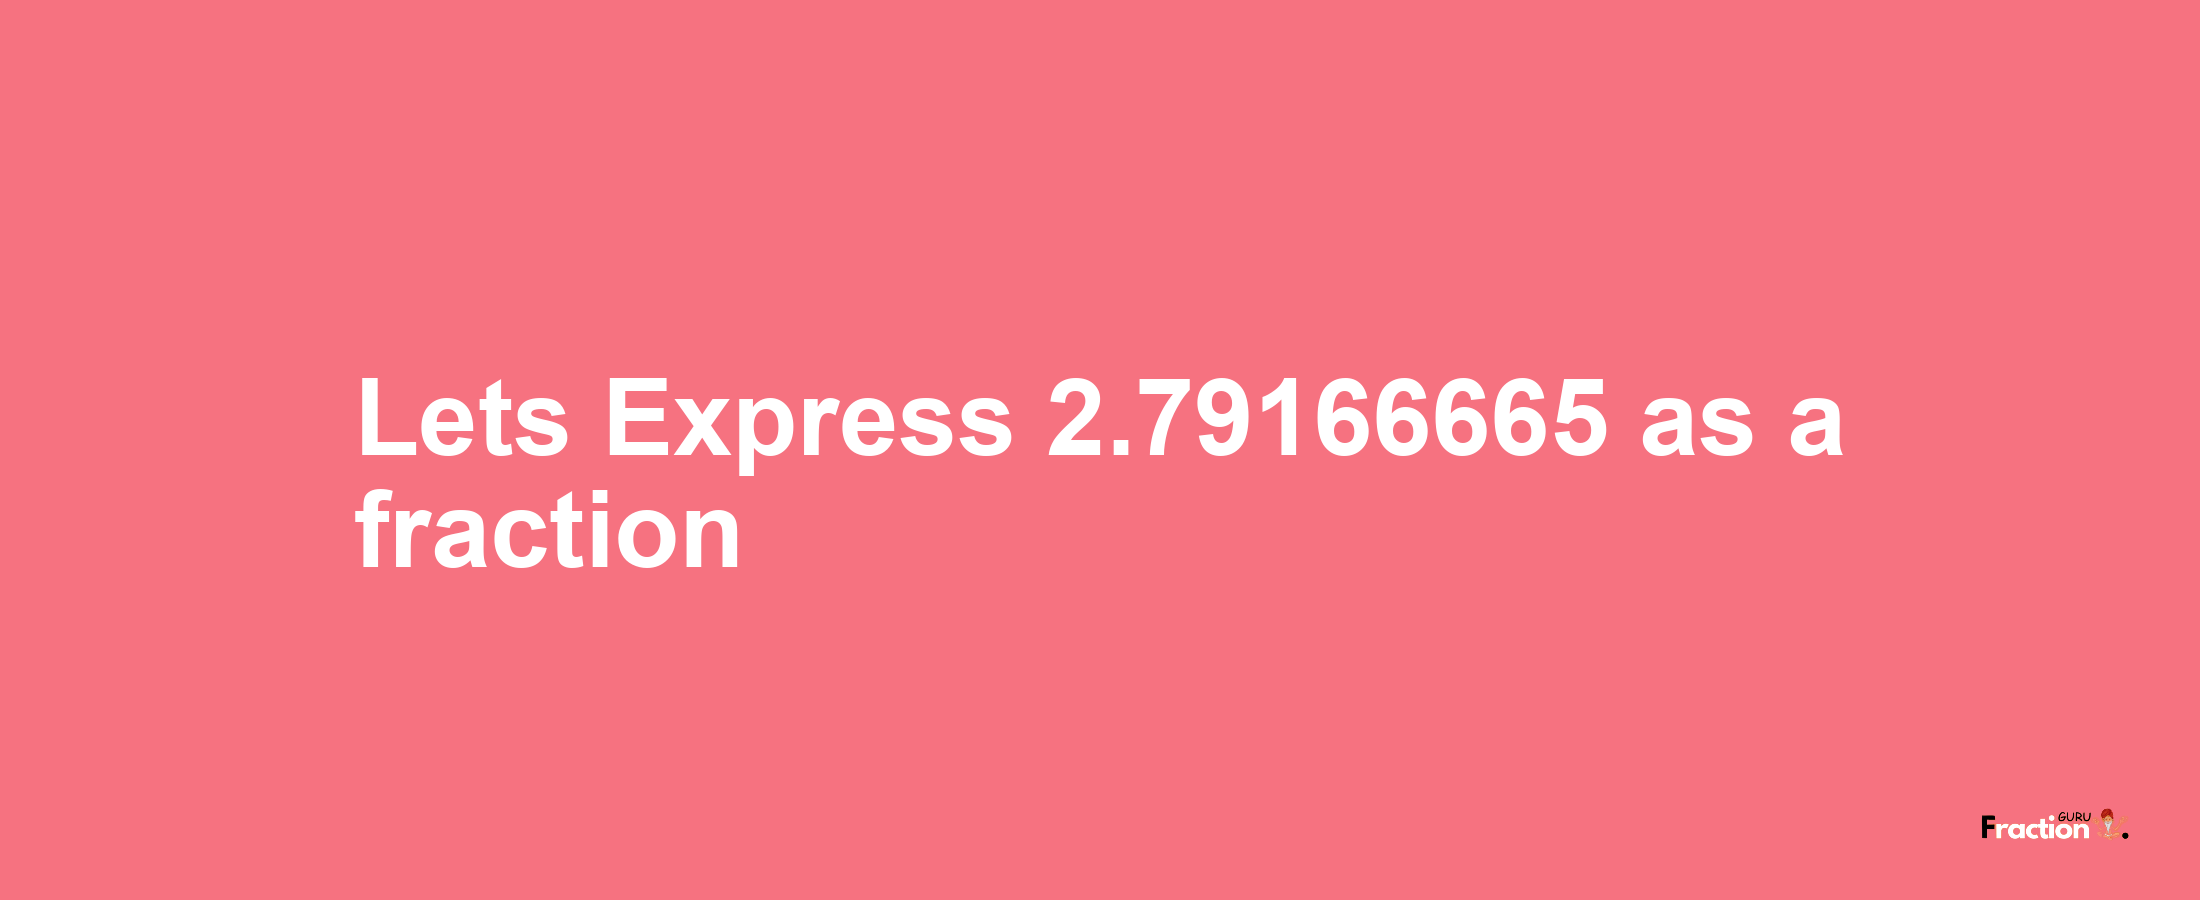 Lets Express 2.79166665 as afraction